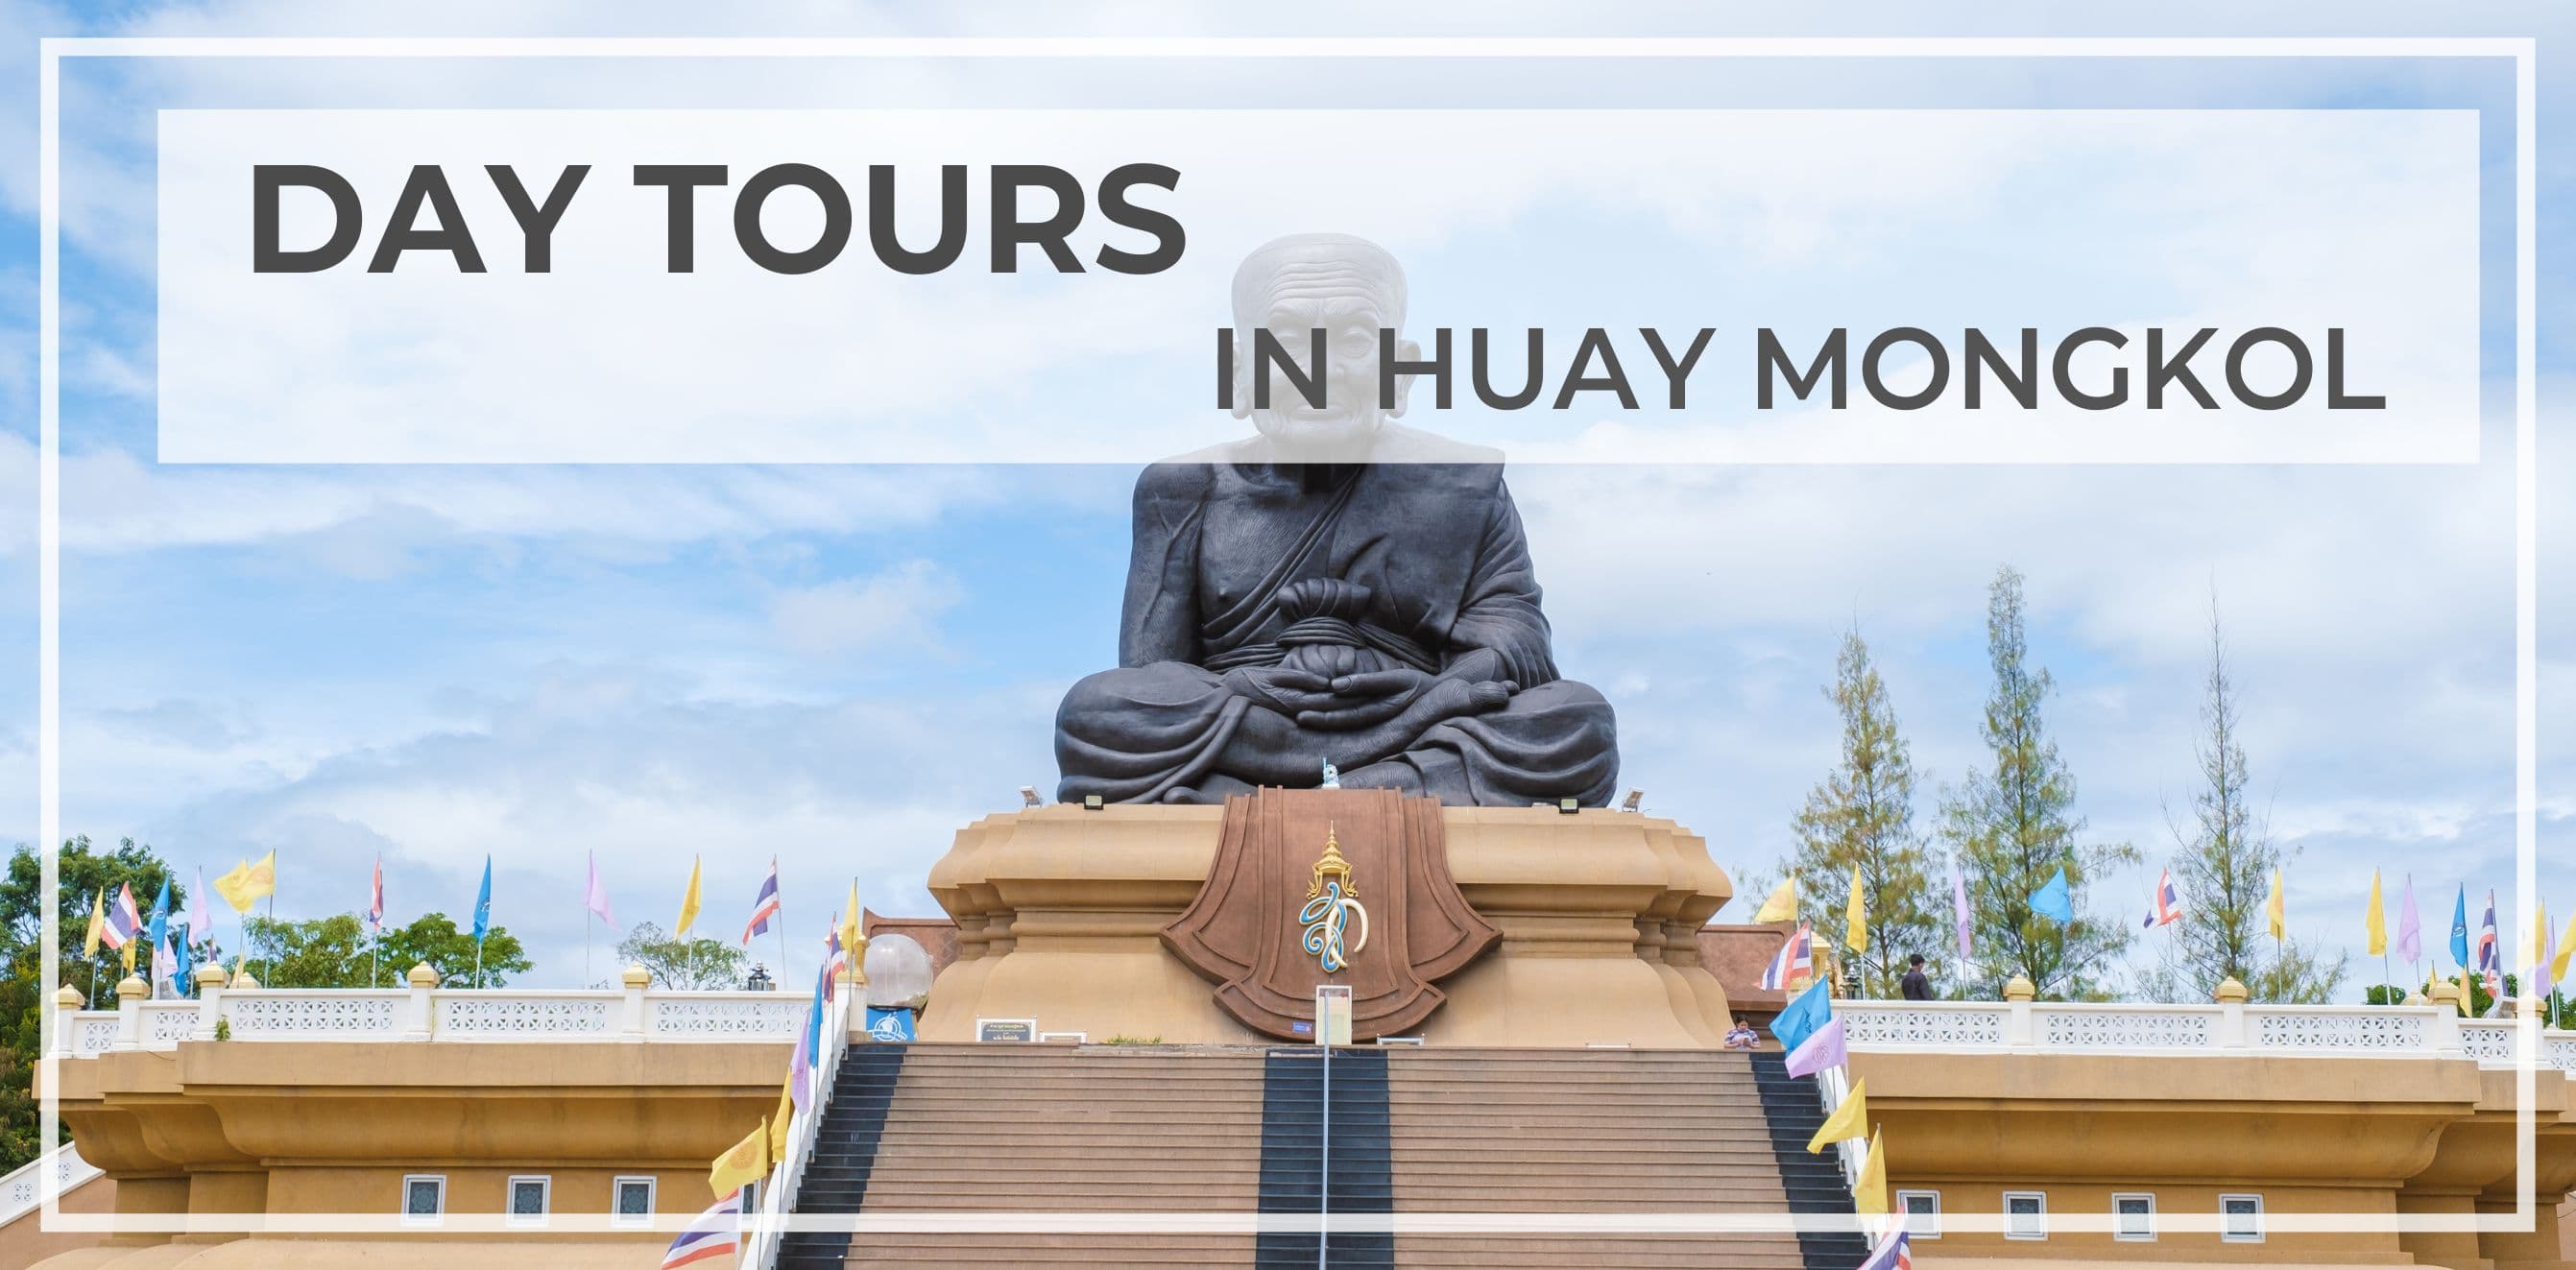 ONE DAY TOURS IN HUAY MONGKOL